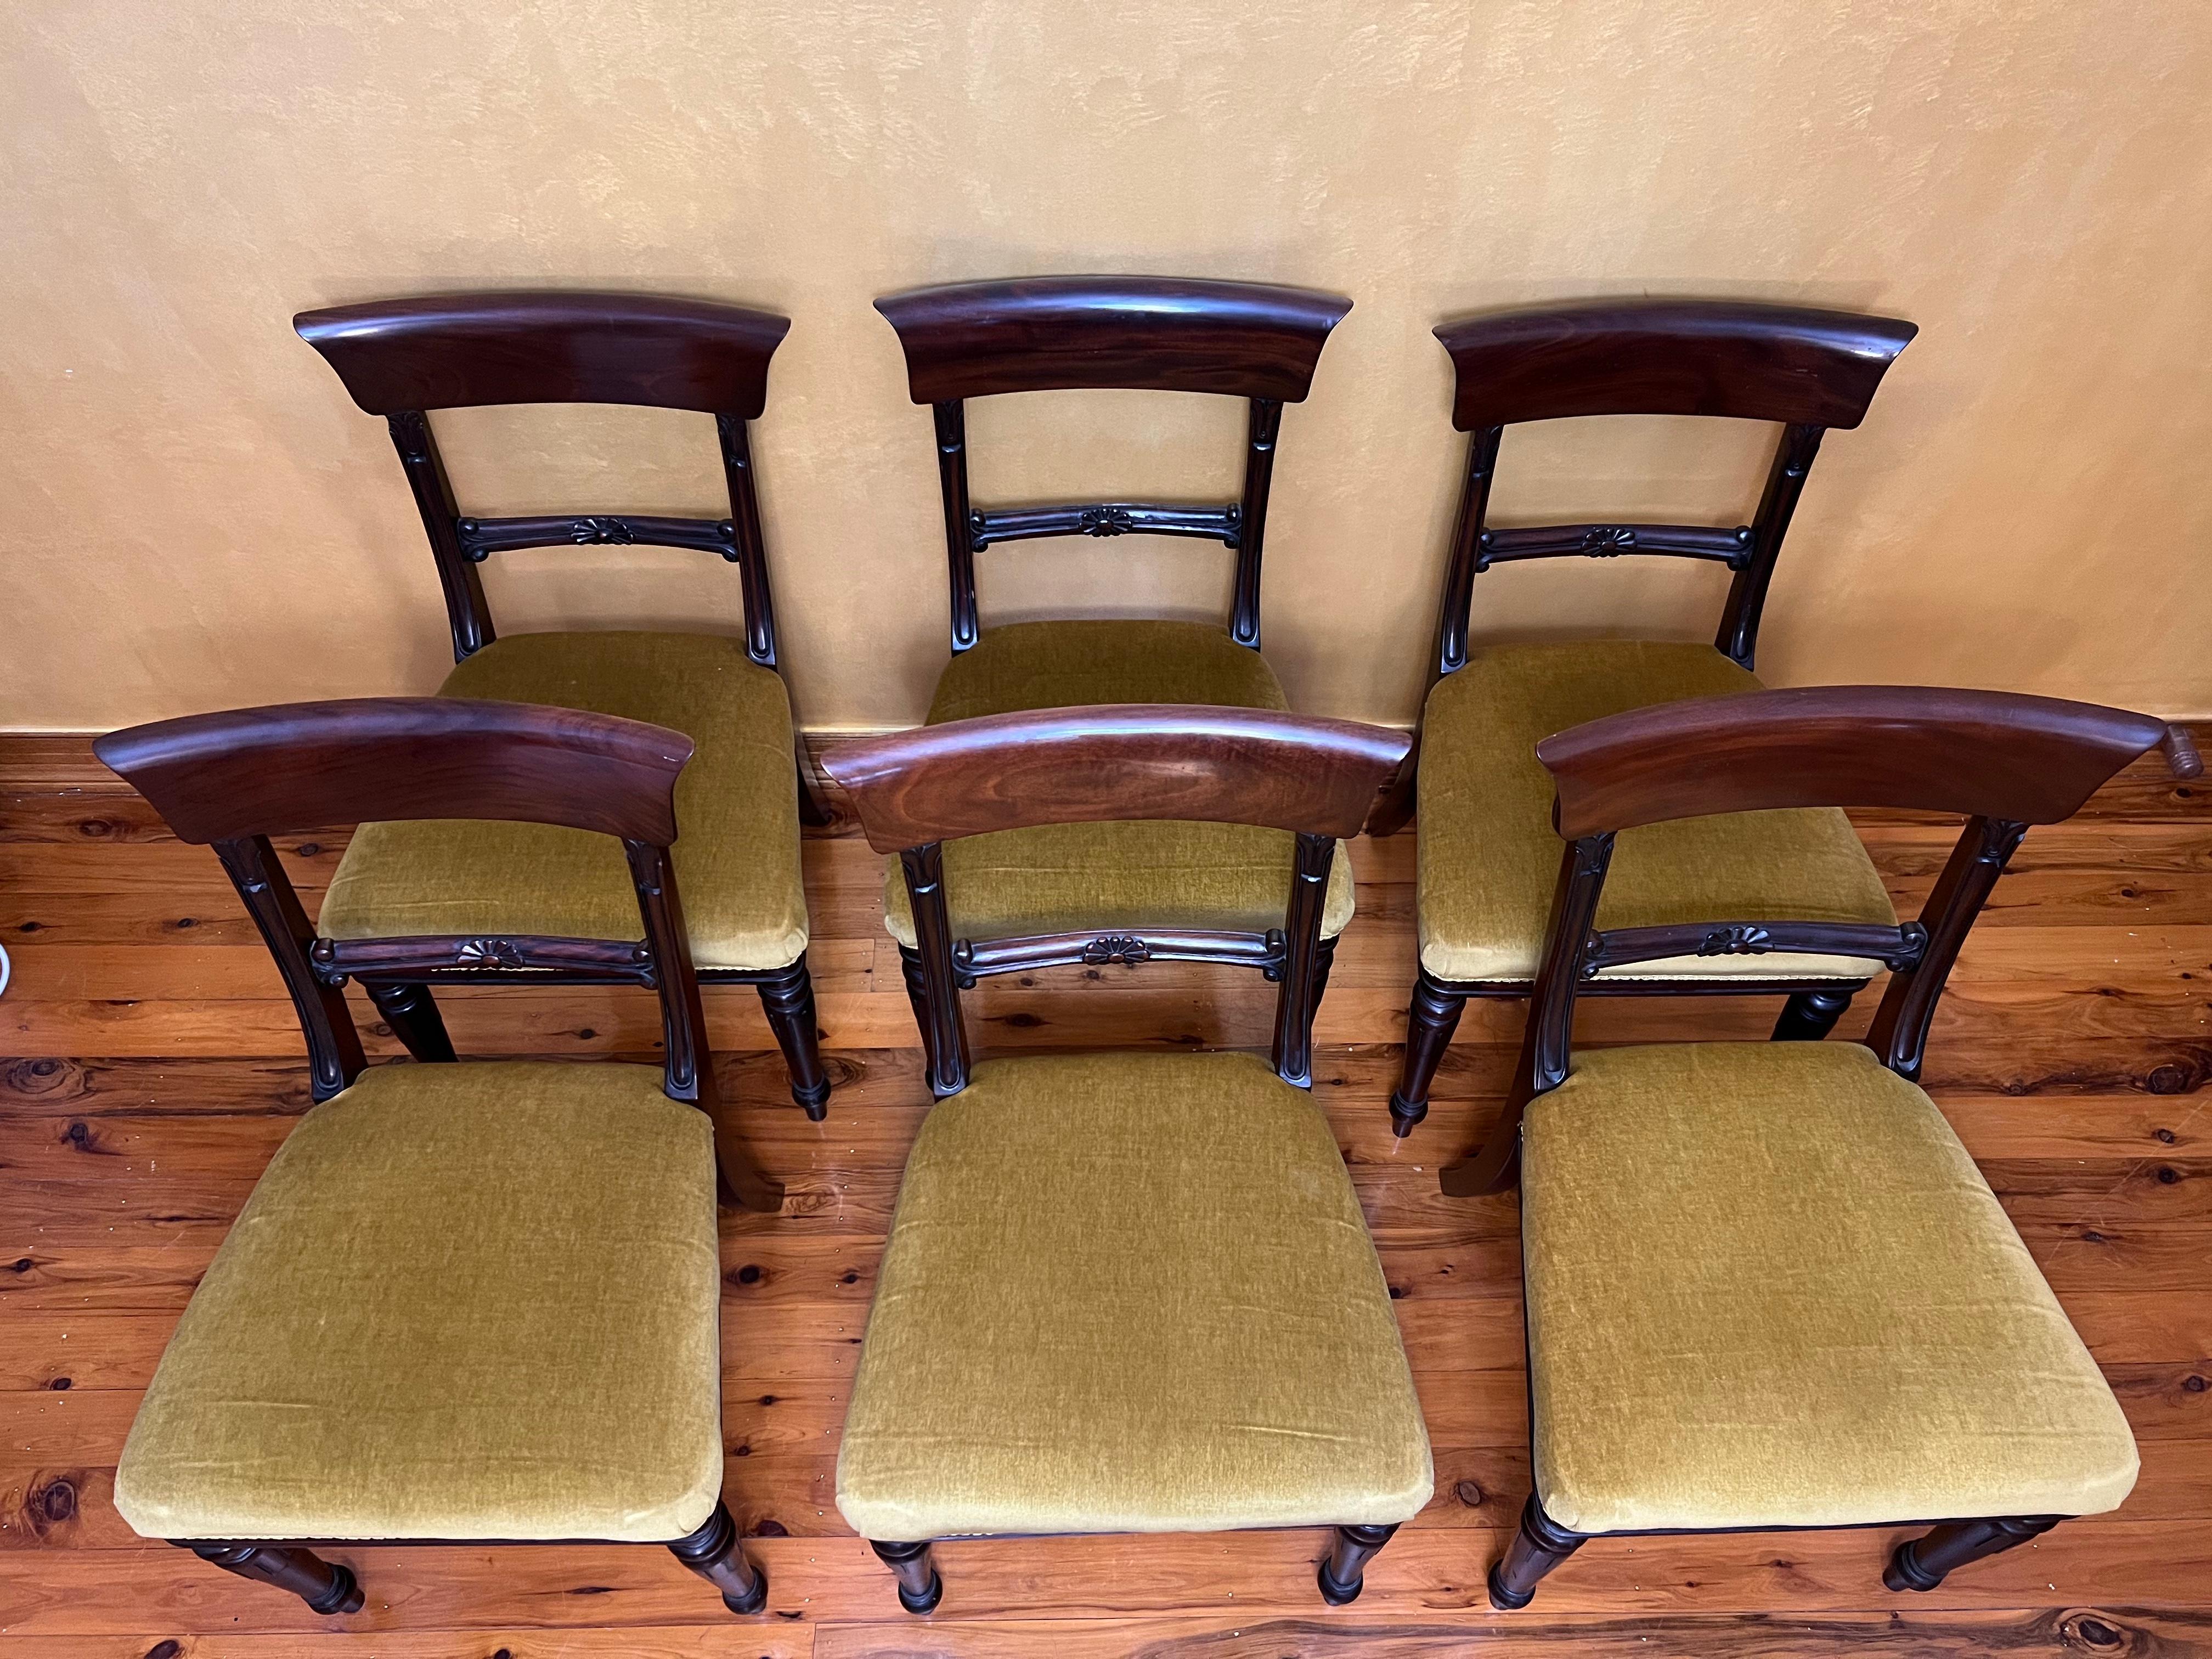 Carved mid back rail, slat back top rail, carved and turned legs, gold velvet soft seat. Set of six

Circa: 1920

Material: Mahogany & Velvet 

Country of Origin: English

Measurements: 88cm high, 51cm length, 45cm width, 46cm to seat